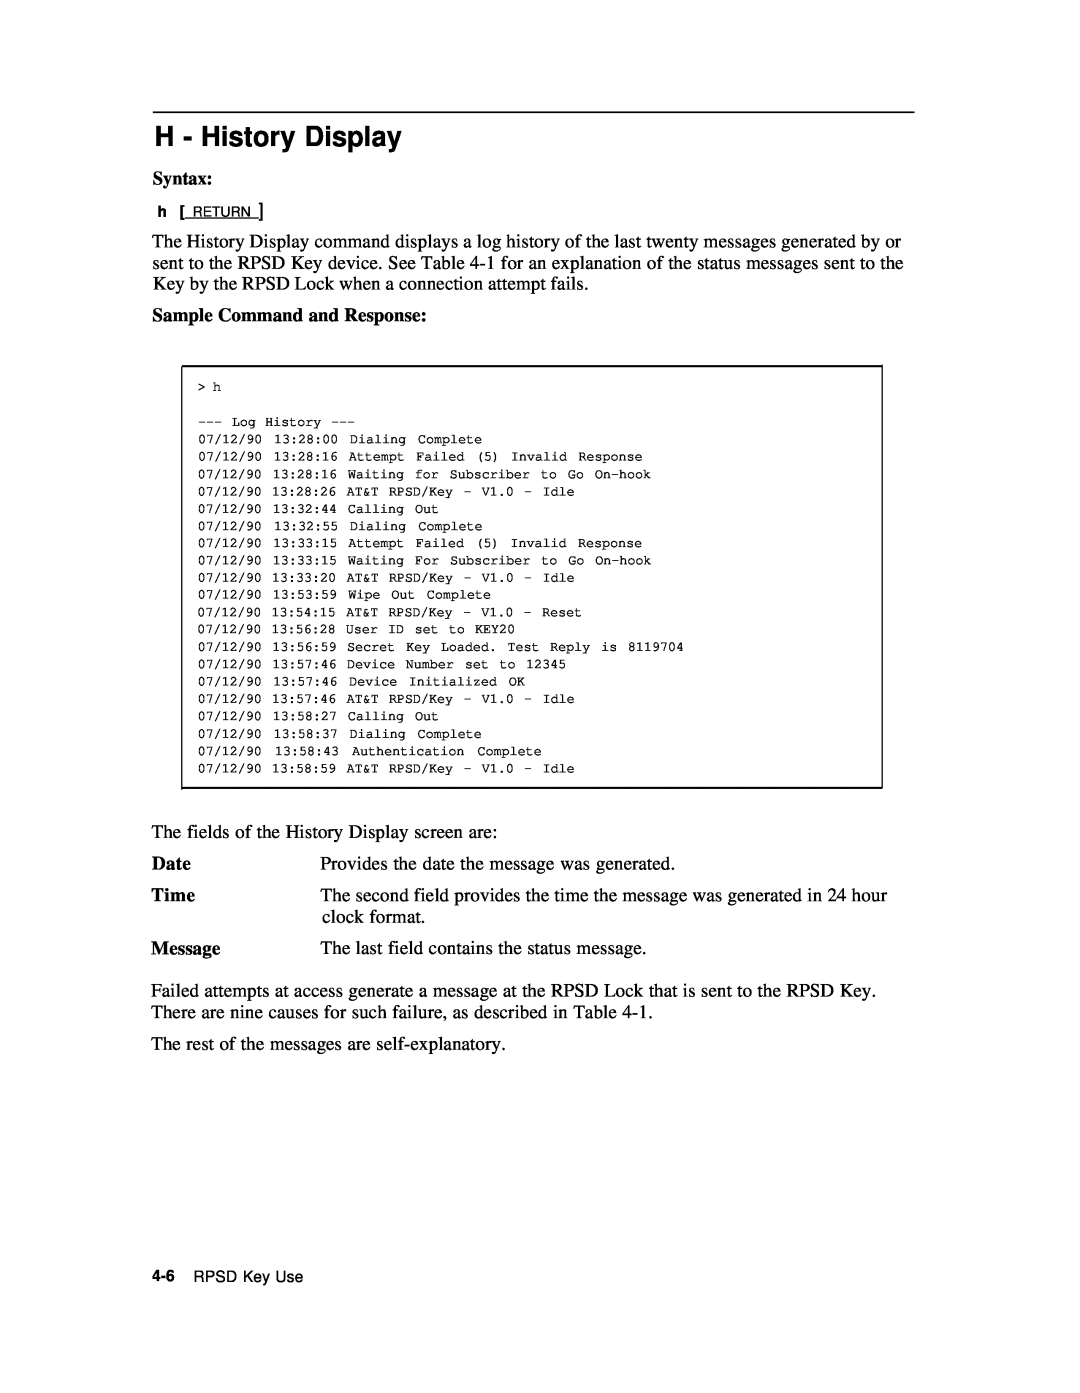 AT&T Remote Port Security Device user manual H - History Display 